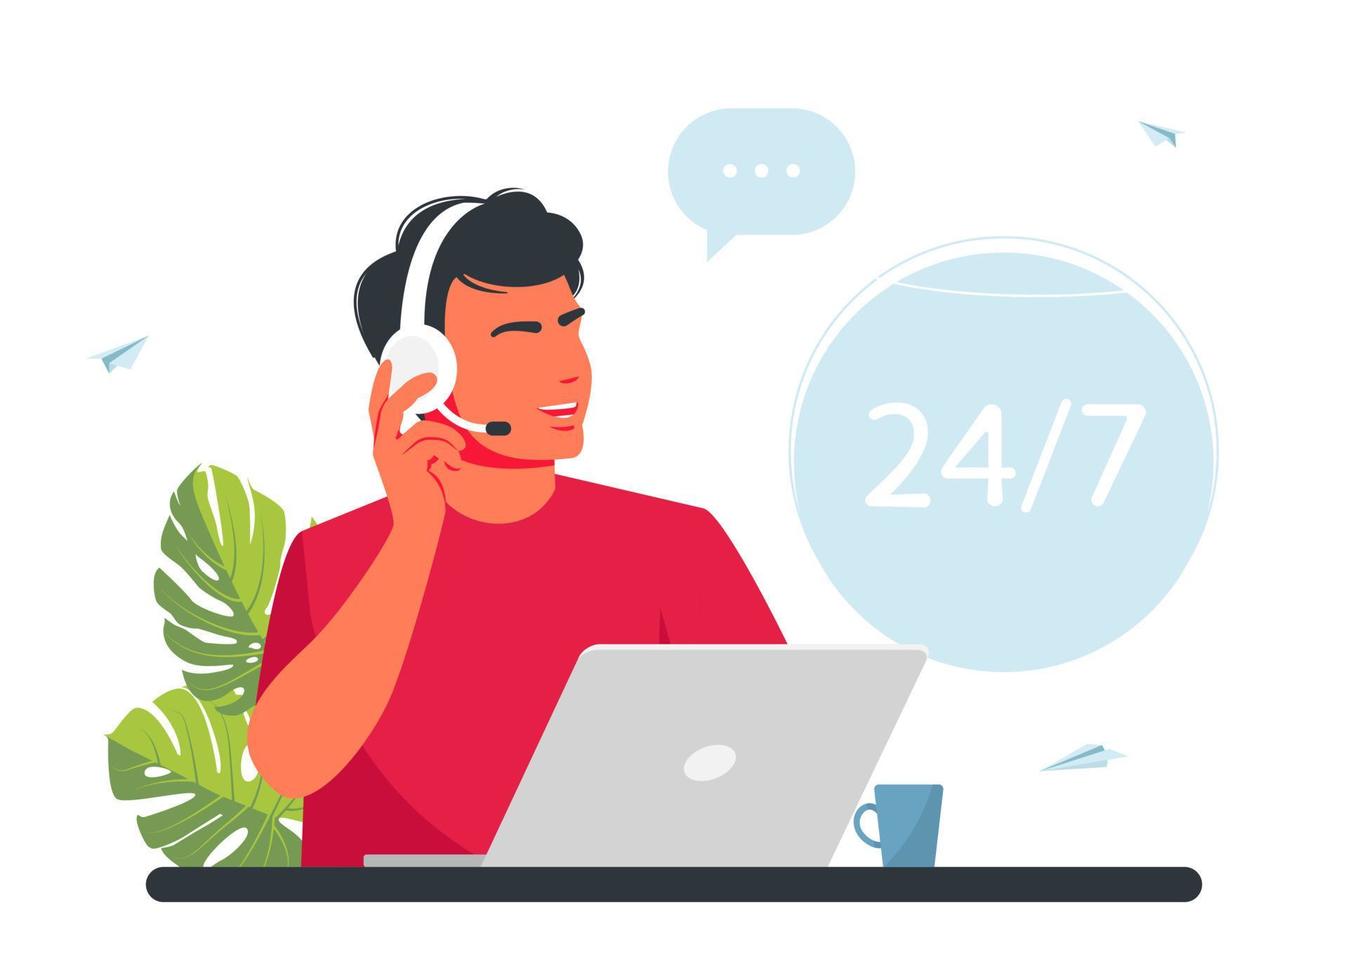 Operator call center. Customer service. Man with headphones, microphone with a laptop. Concept vector illustration for support. hotline operators consult customers with headsets on computers